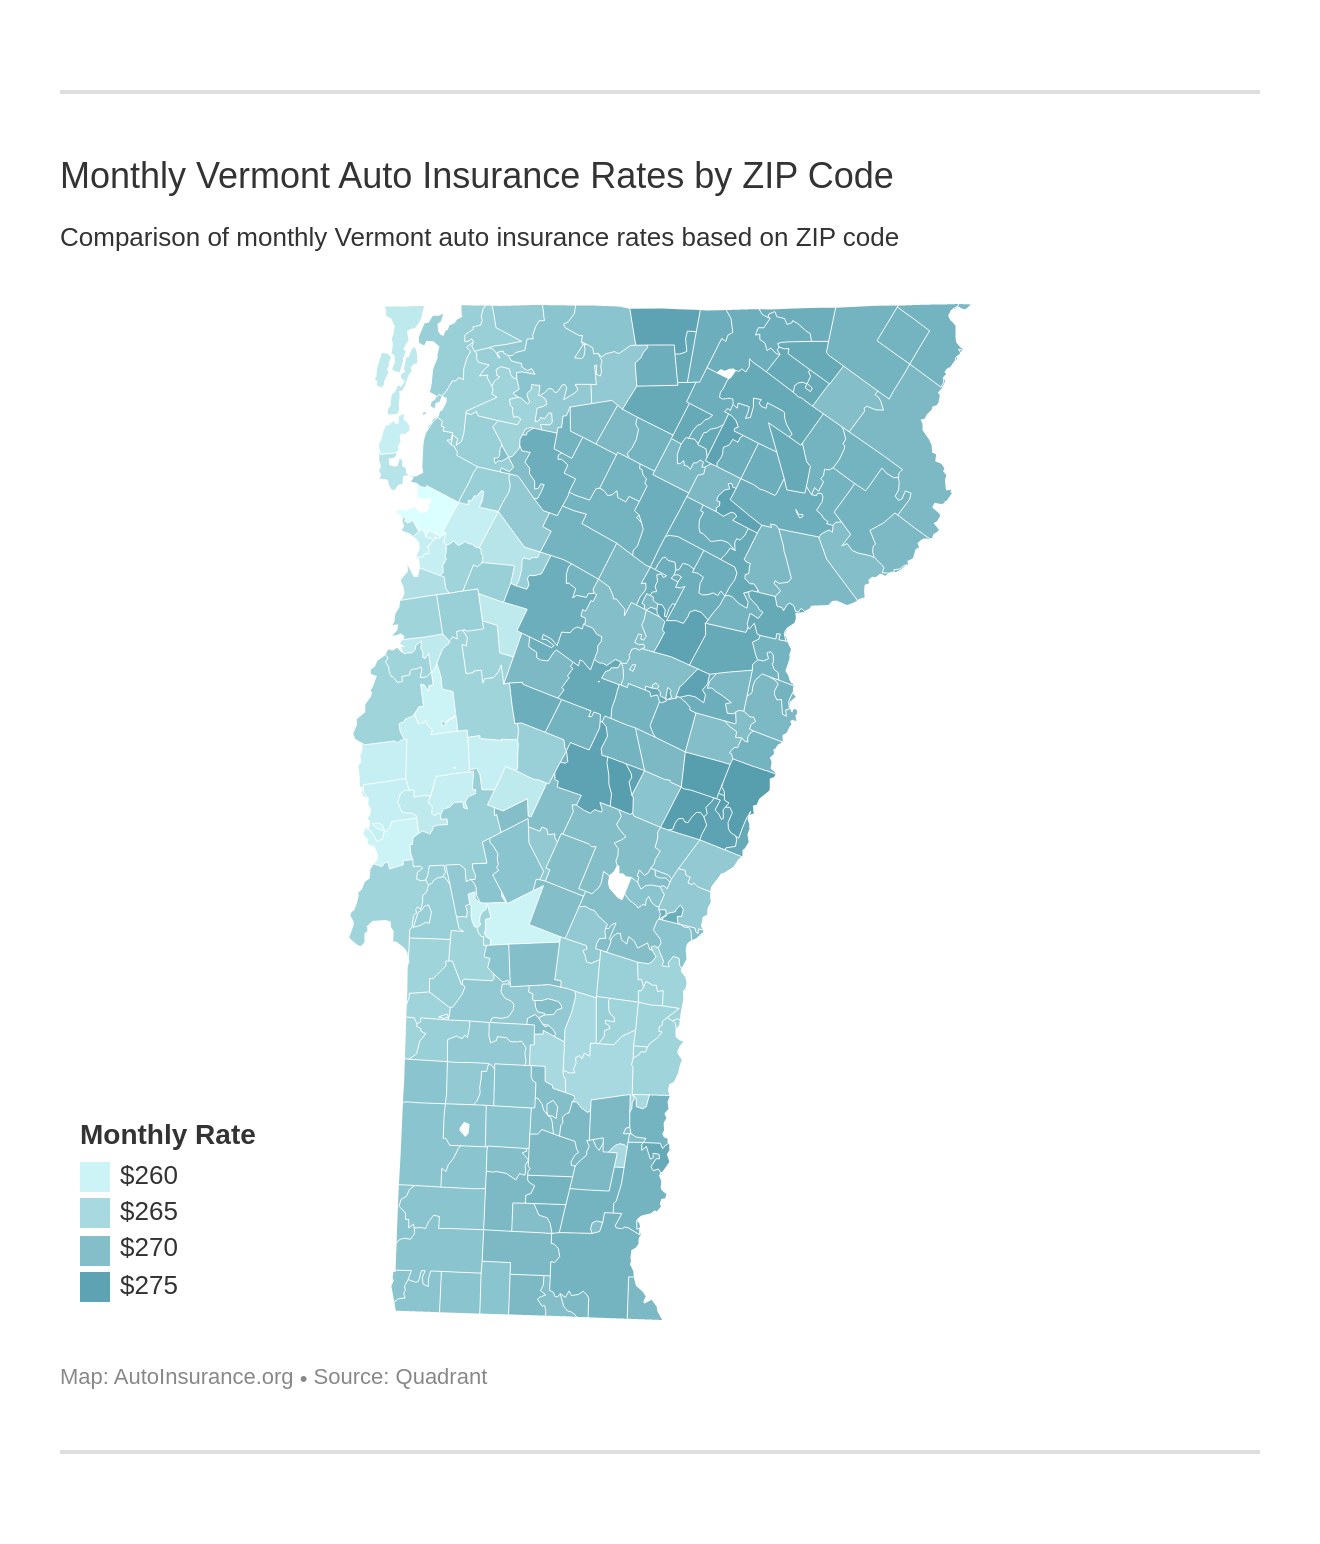 Monthly Vermont Auto Insurance Rates by ZIP Code